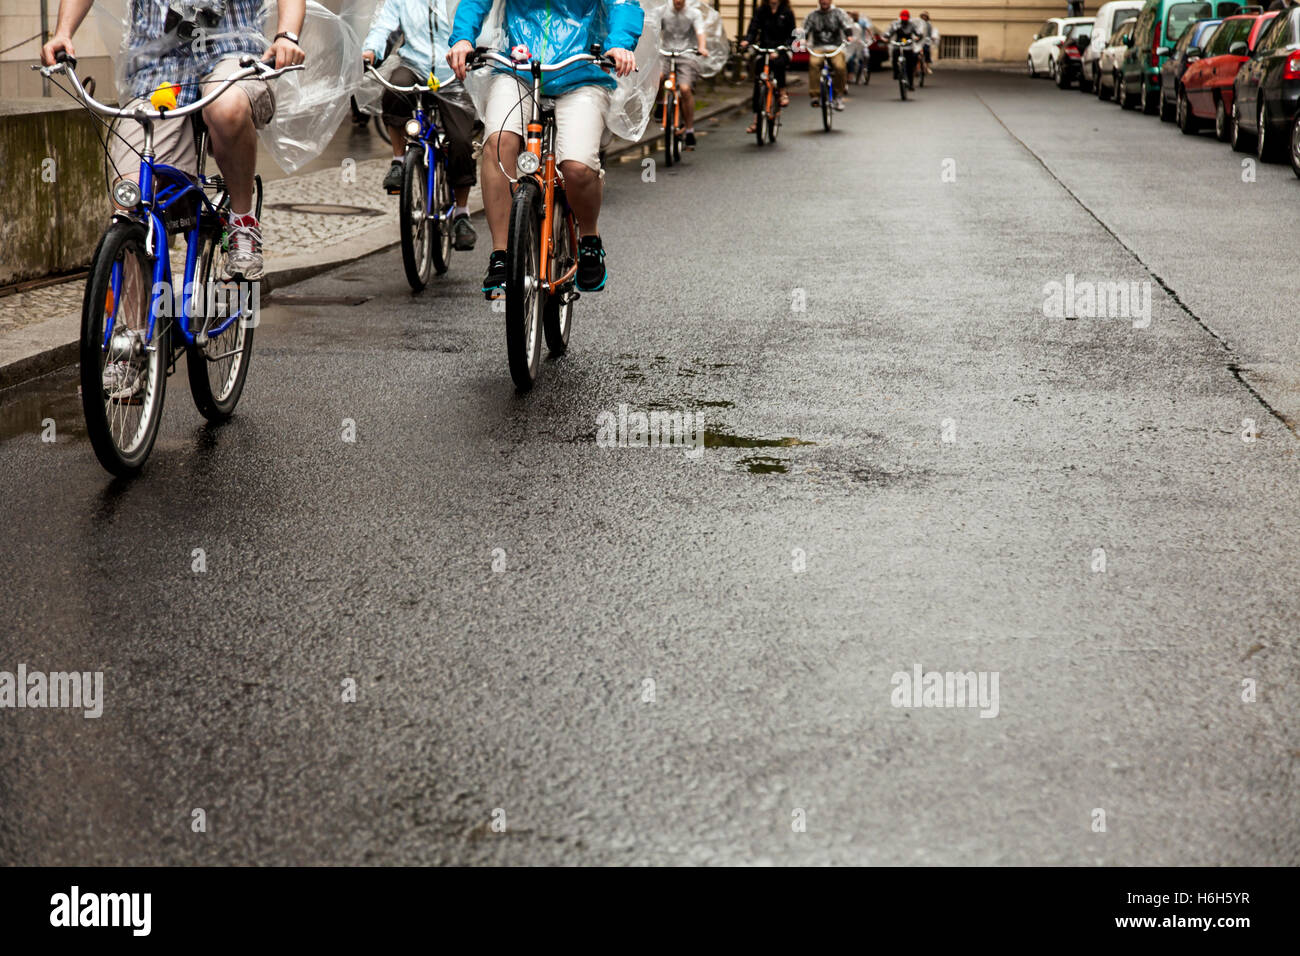 Group of cyclers on a wet street in a rainy day. Stock Photo